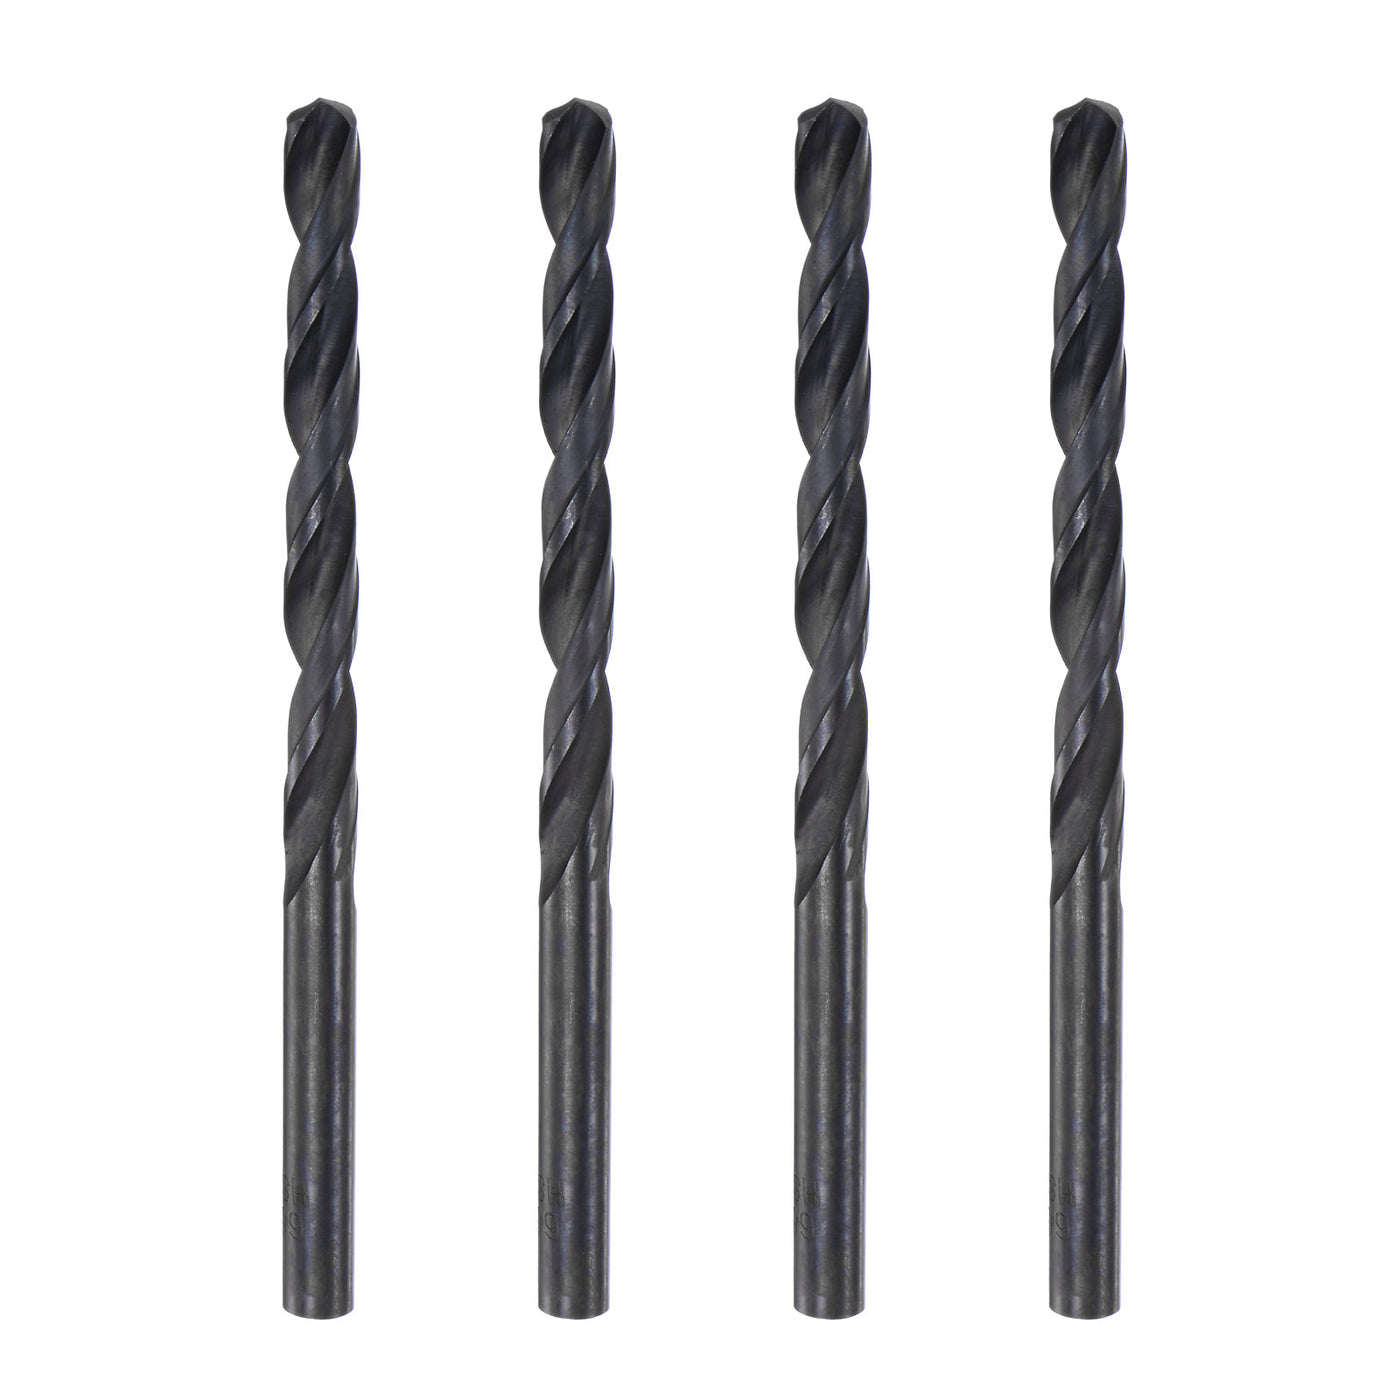 uxcell Uxcell High Speed Steel Twist Drill Bit, 6.6mm Fully Ground Black Oxide 110mm Long 4Pcs